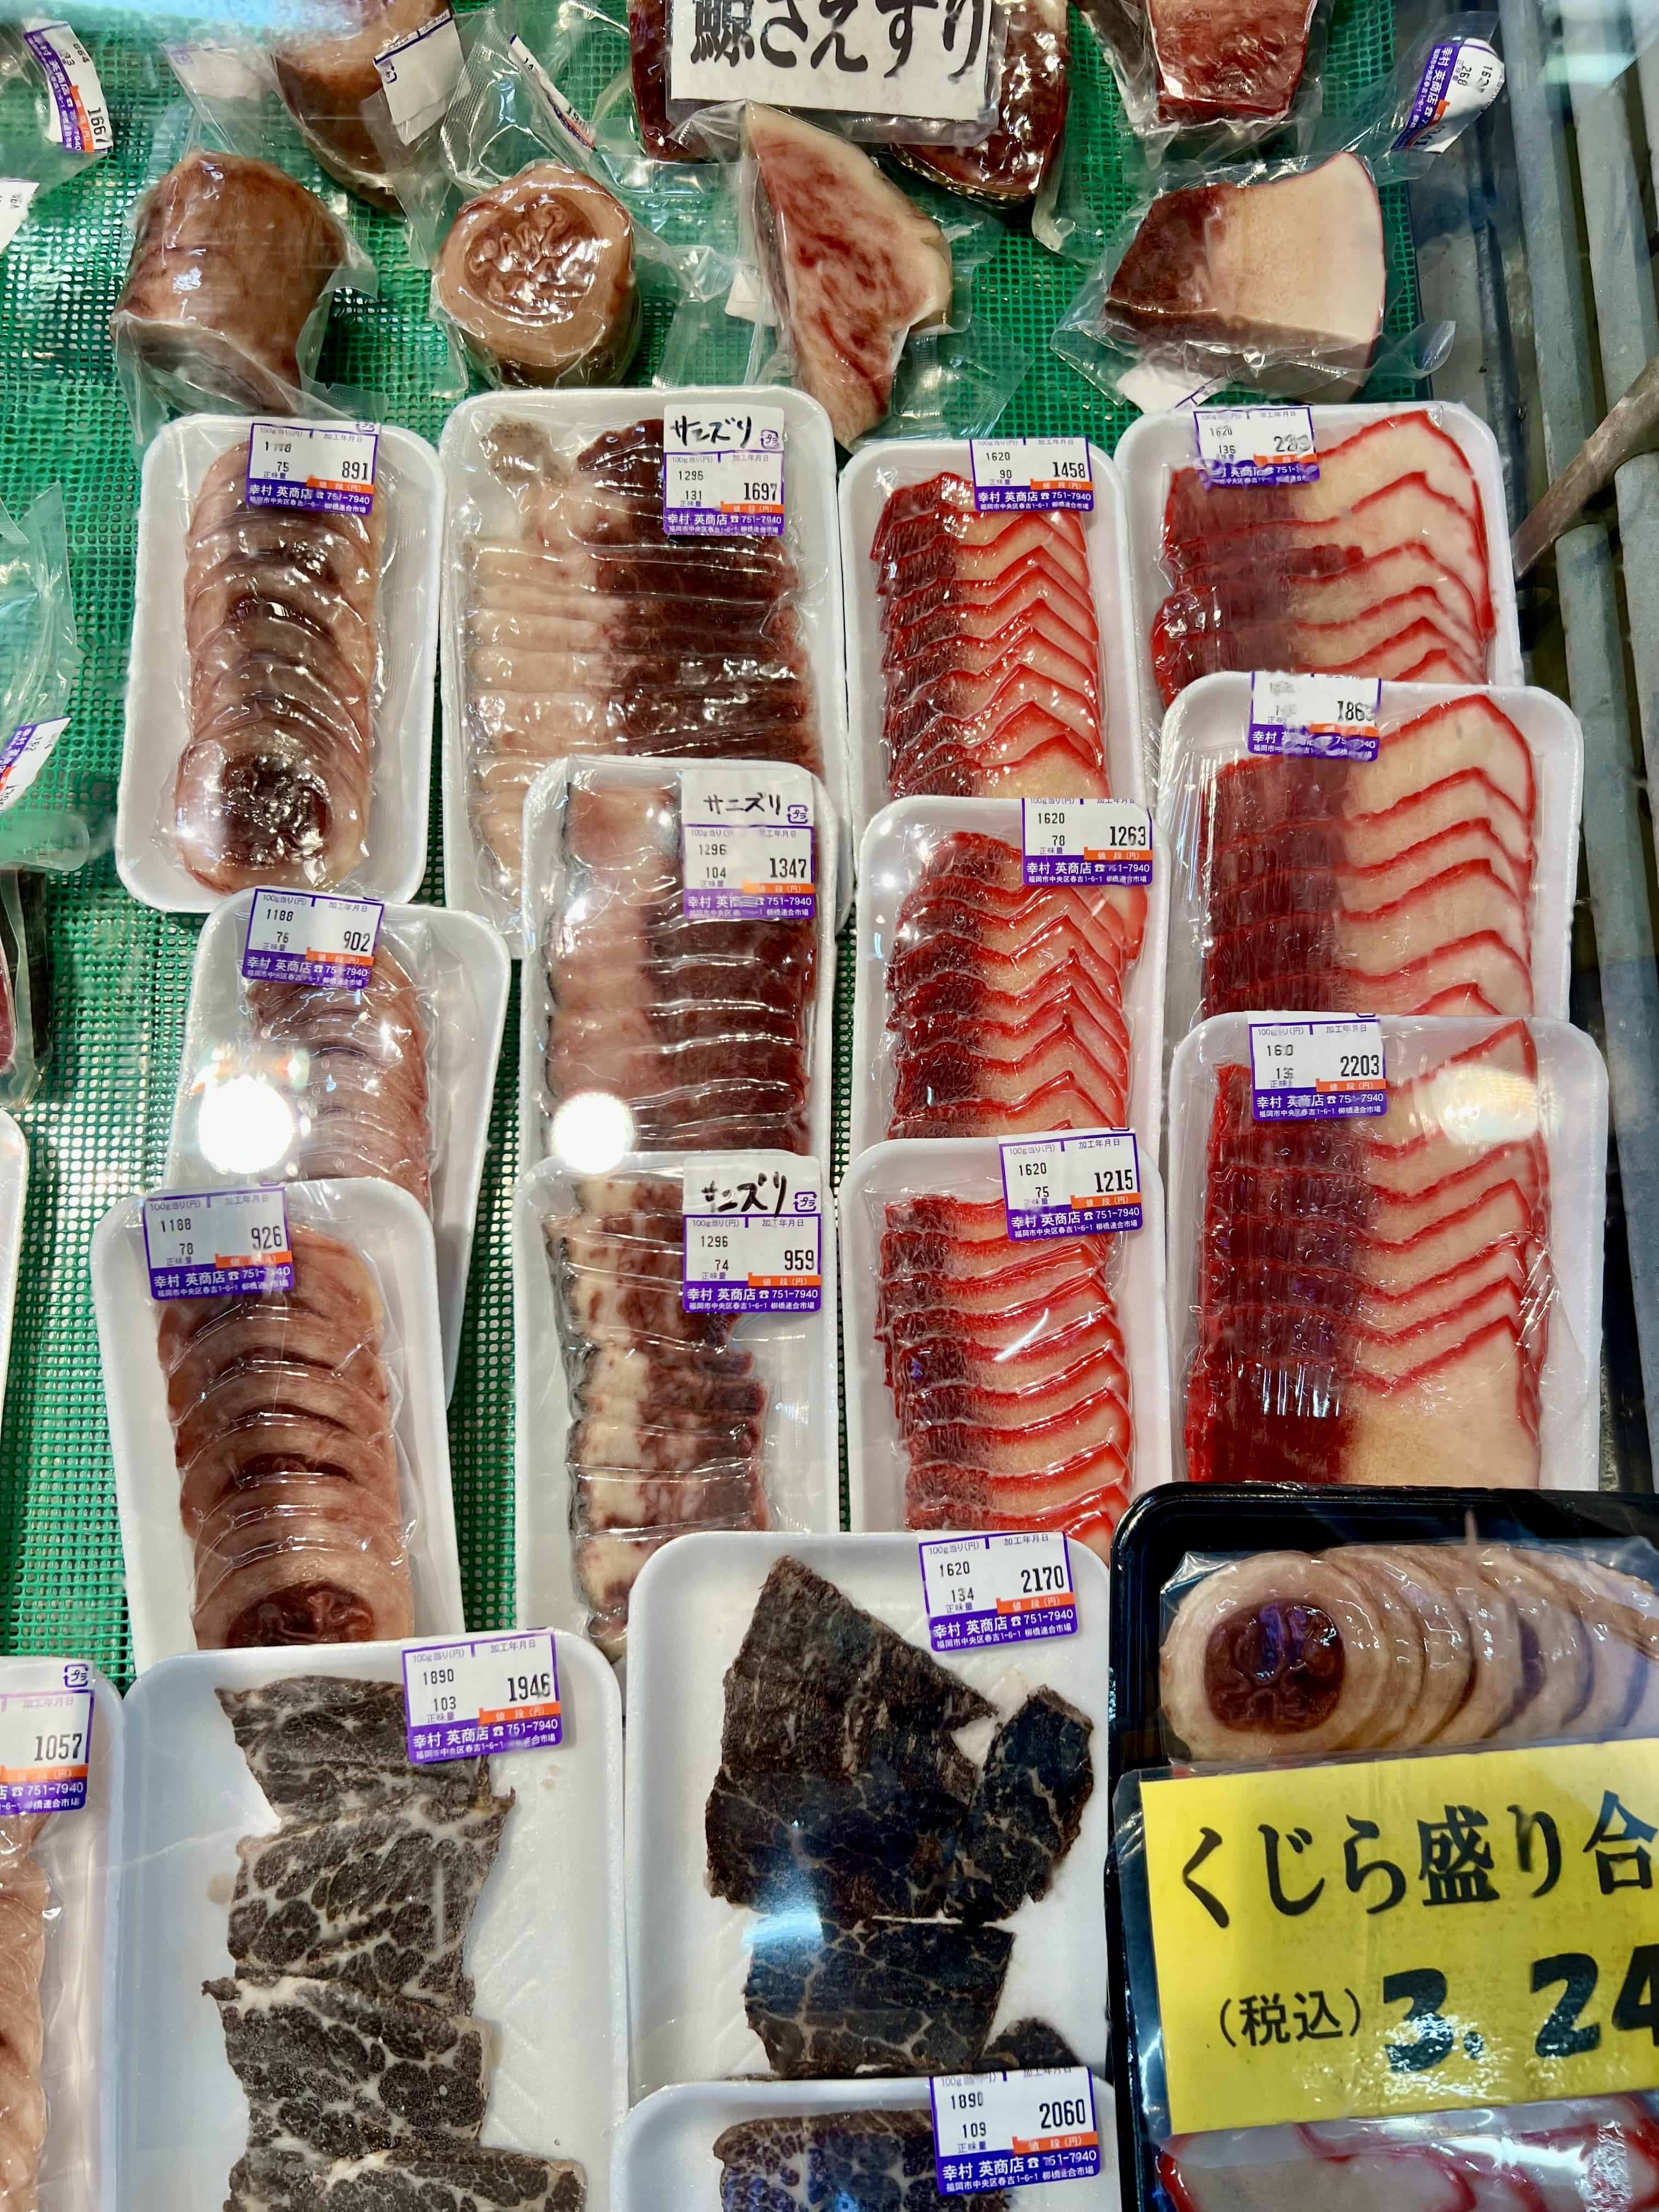 Plastic wrapped packages of whale meat on display in a market.